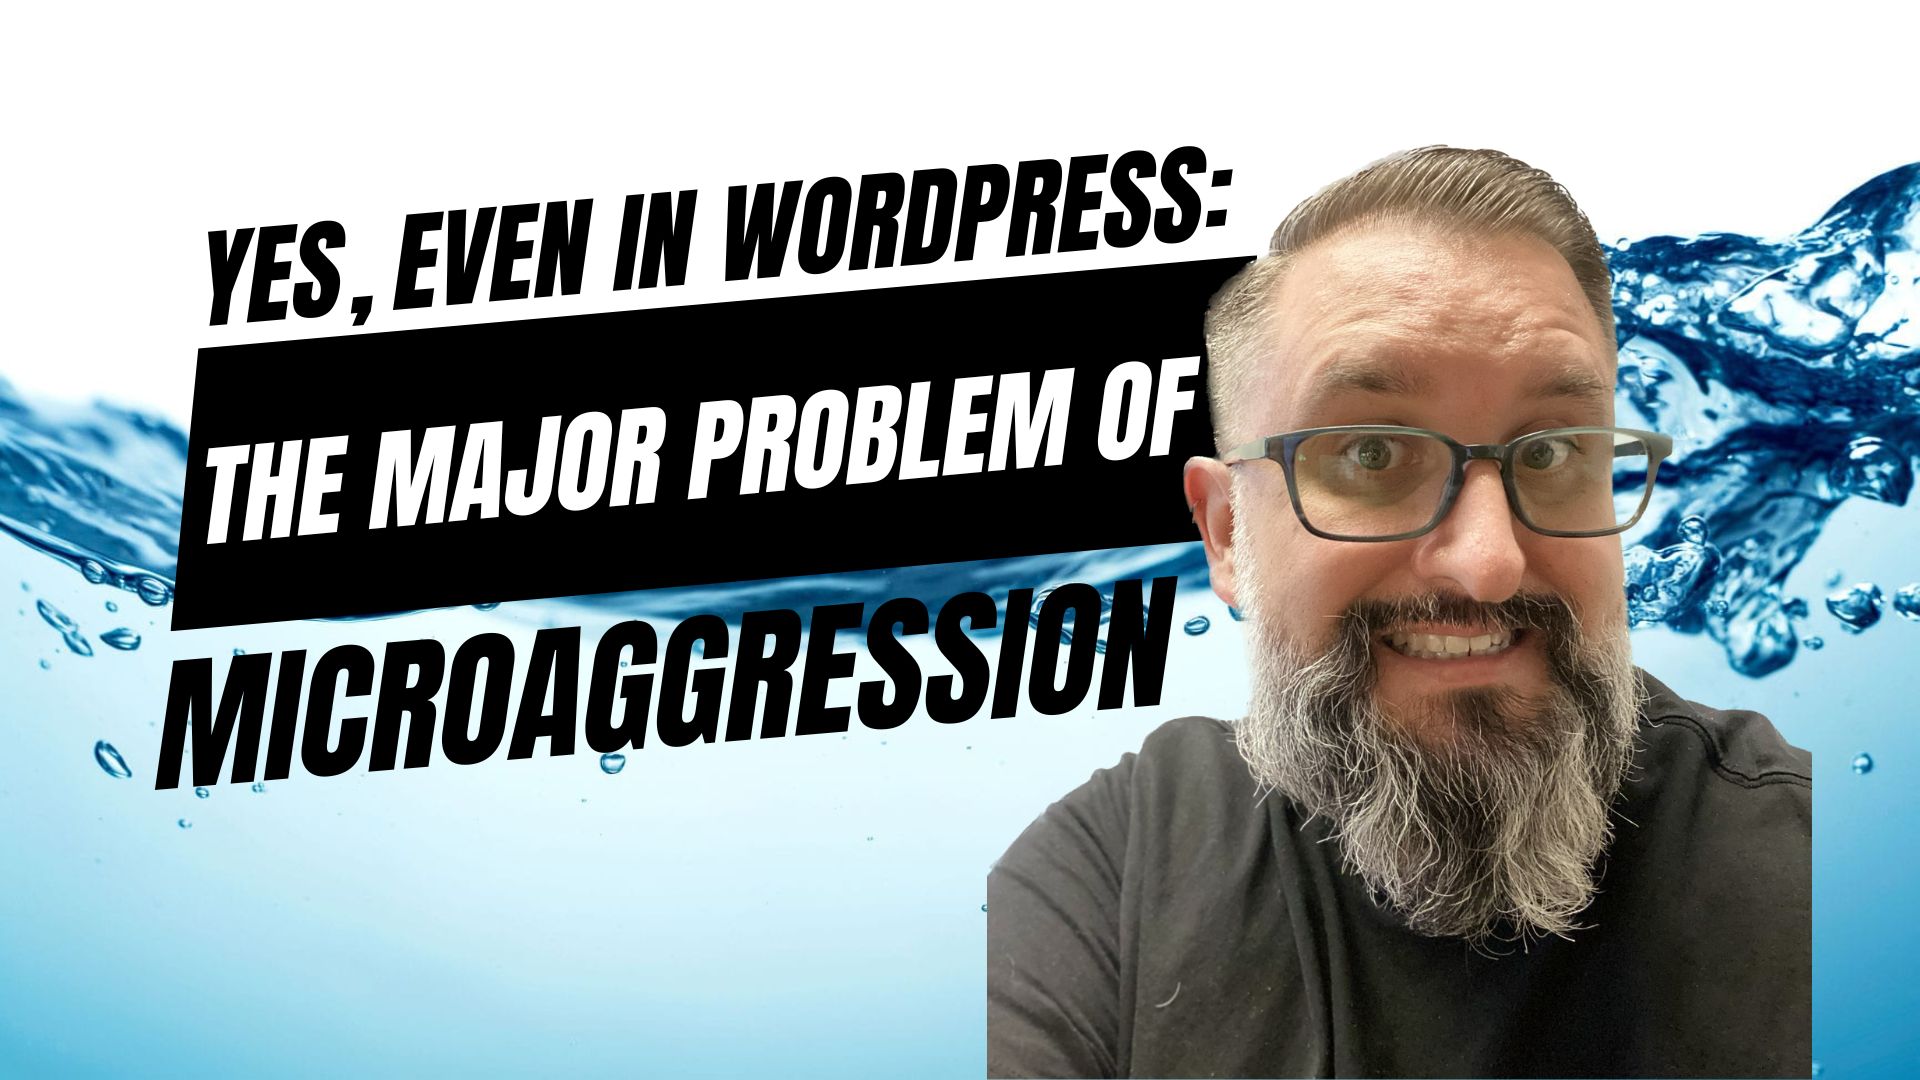 EP431 - Yes, Even in WordPress: The Major Problem of Microaggression